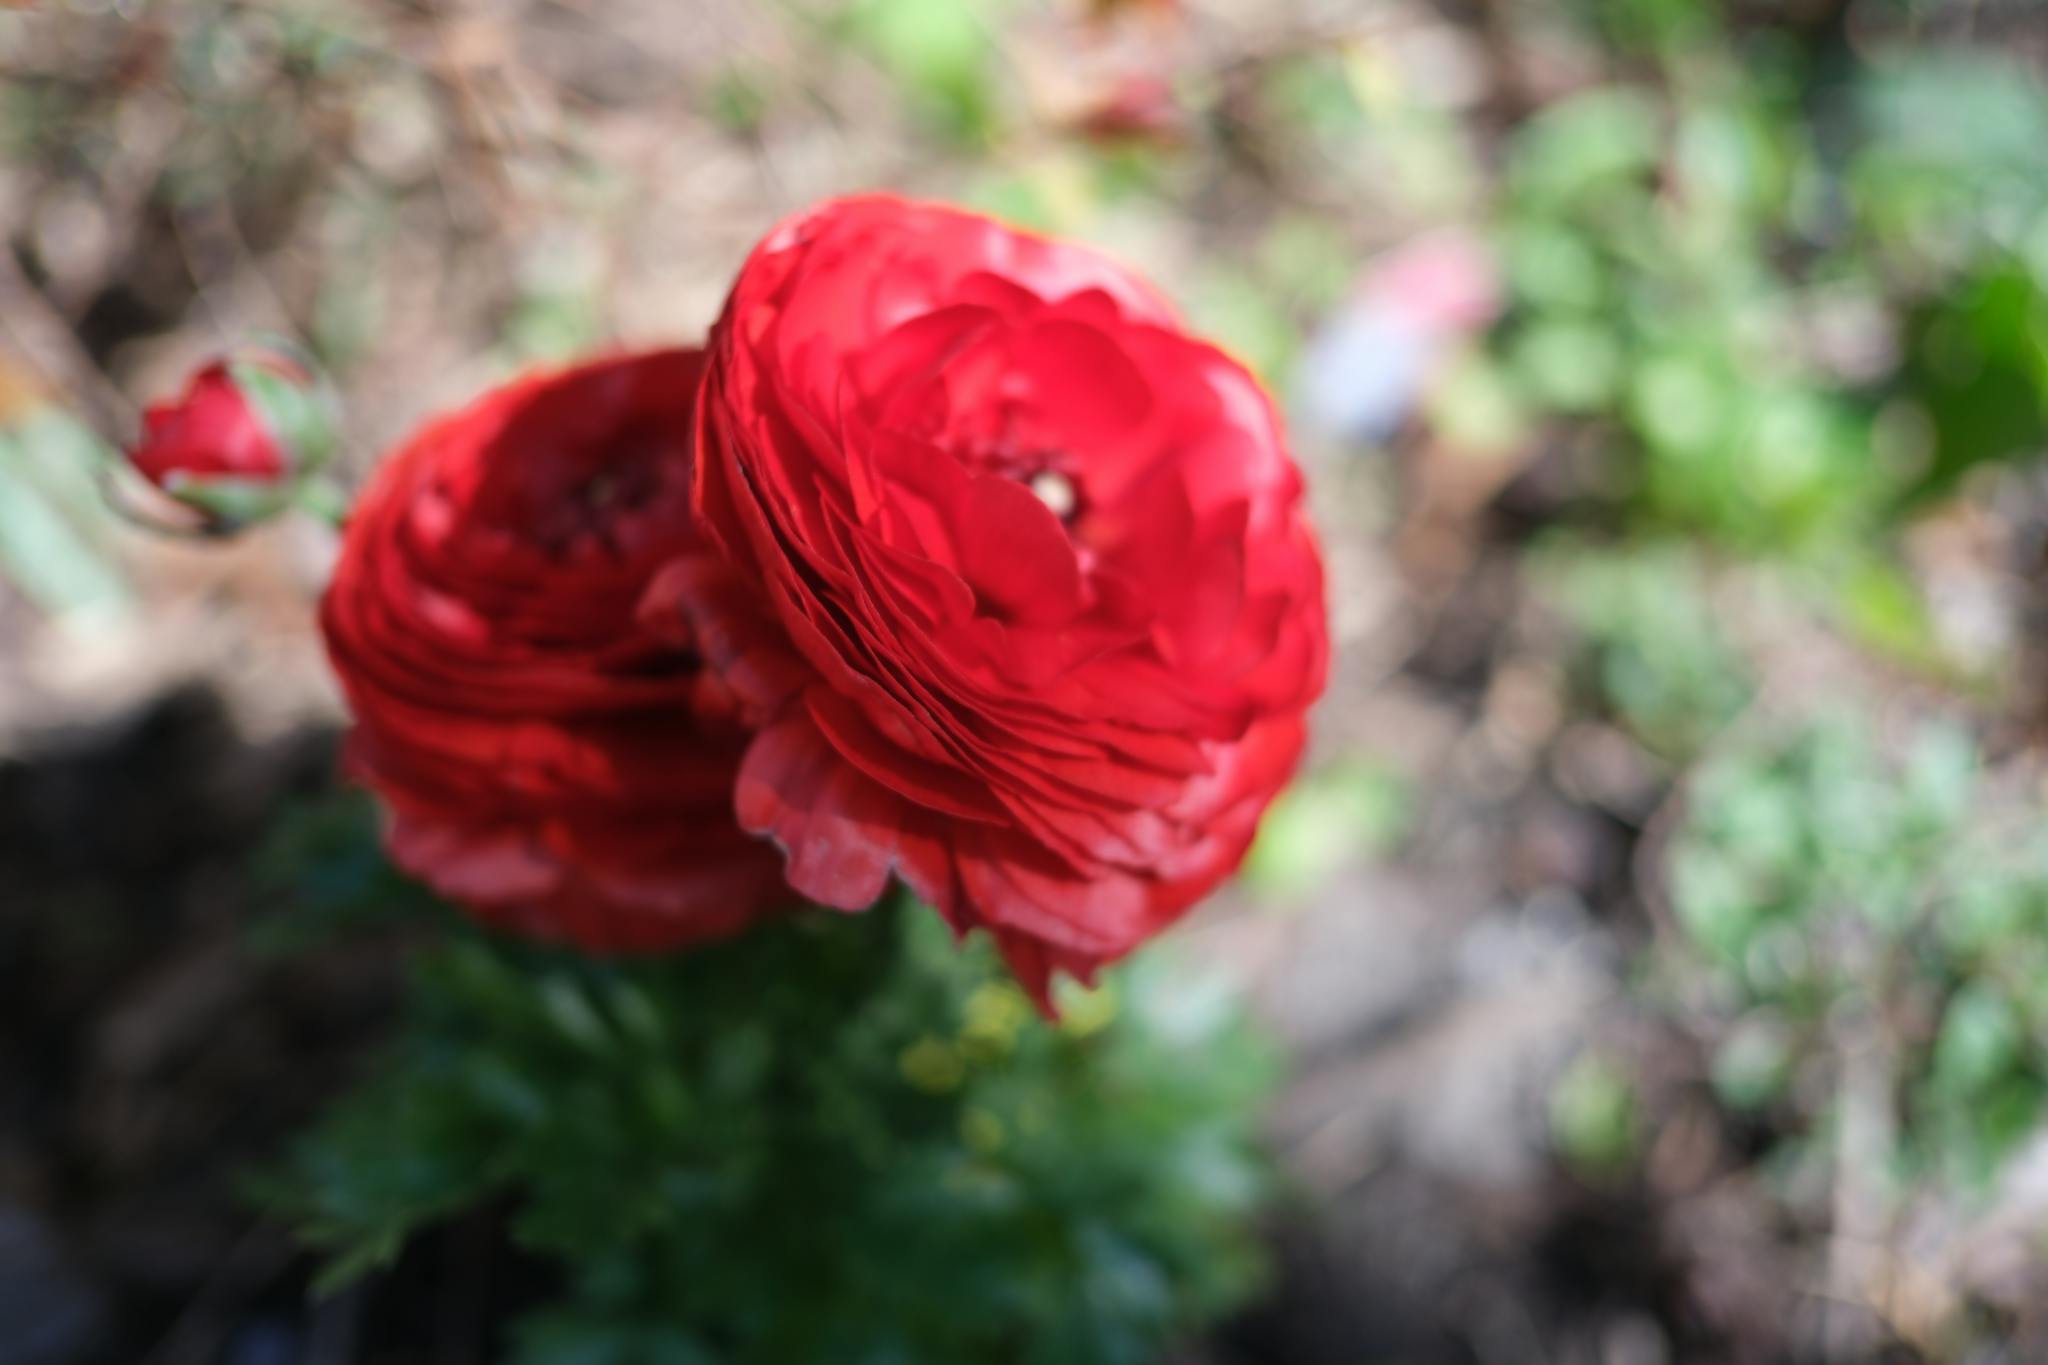 A red ranunculus flower with layered petals is in focus against a blurred natural background